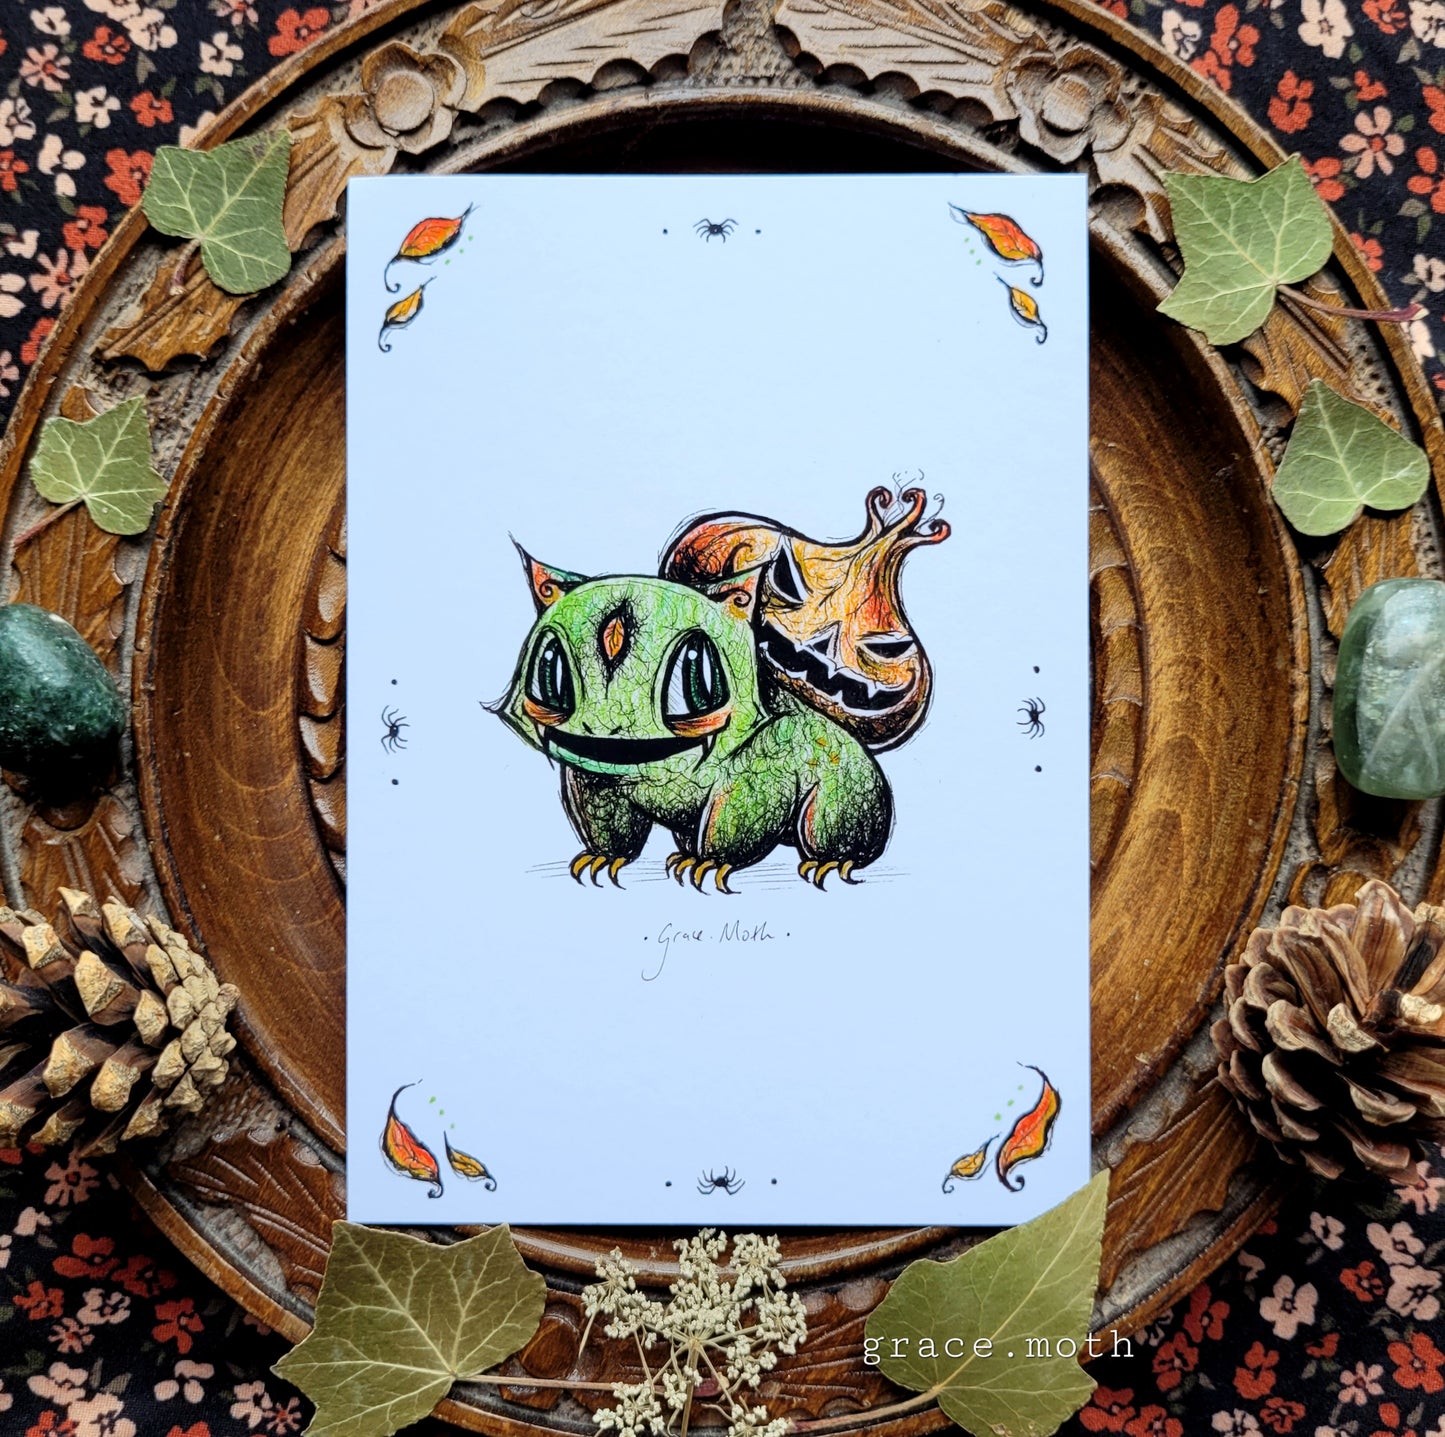 Pumpkin Bulbasaur - Pokemon inspired - A6 print by Grace Moth - 5.8 x 4.1 - Cottagecore - Gothic - Witchy